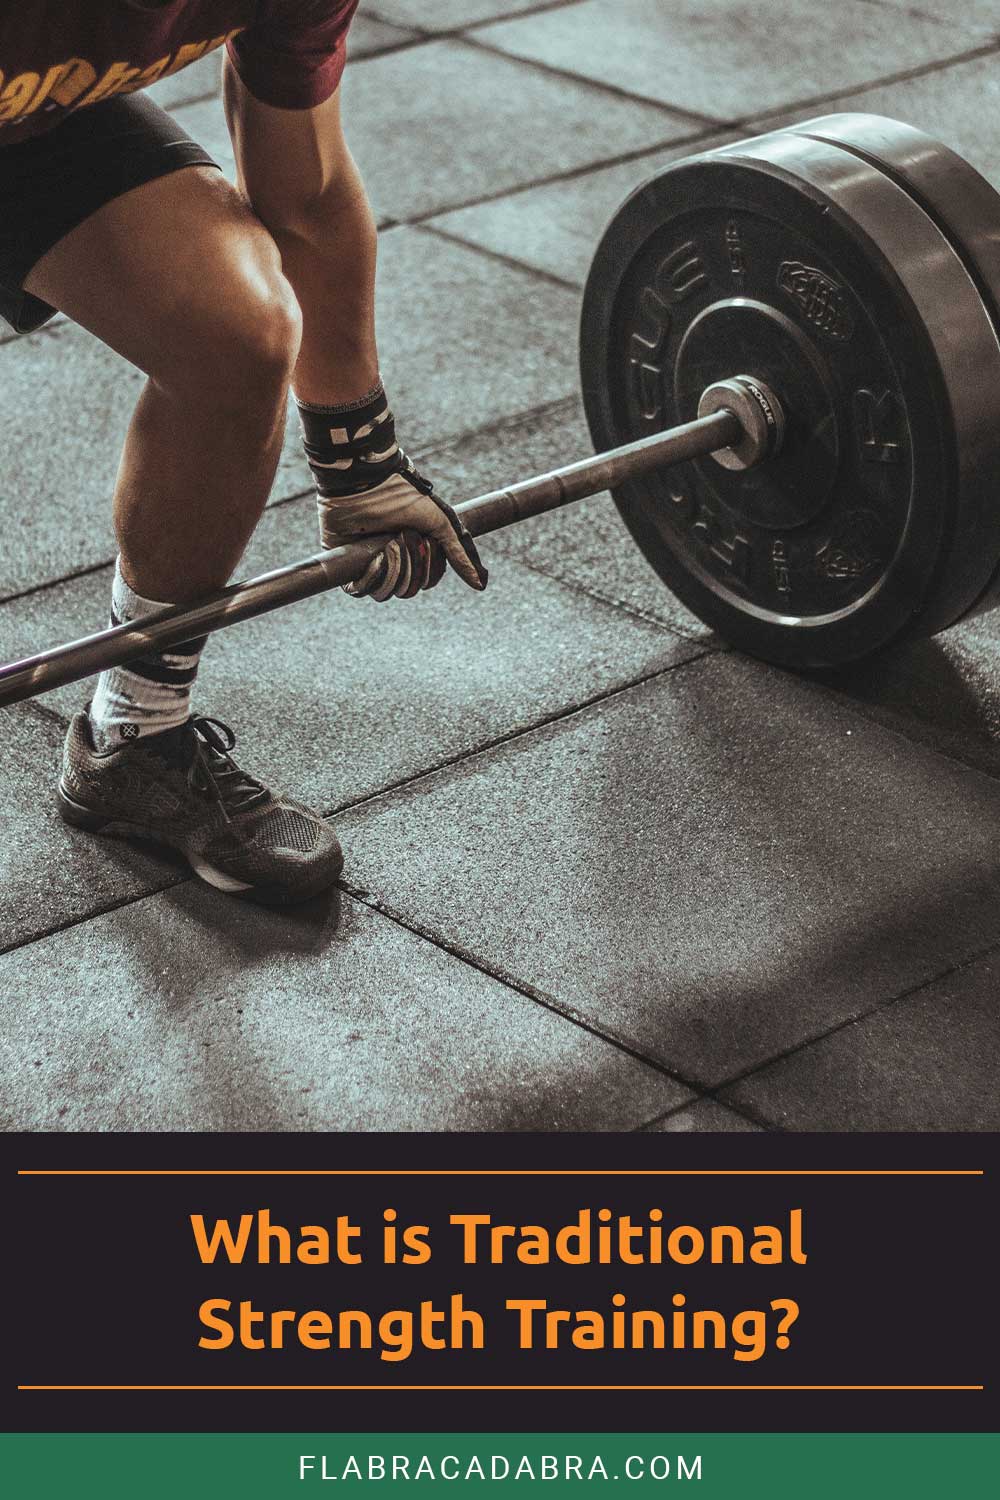 What is Traditional Strength Training?